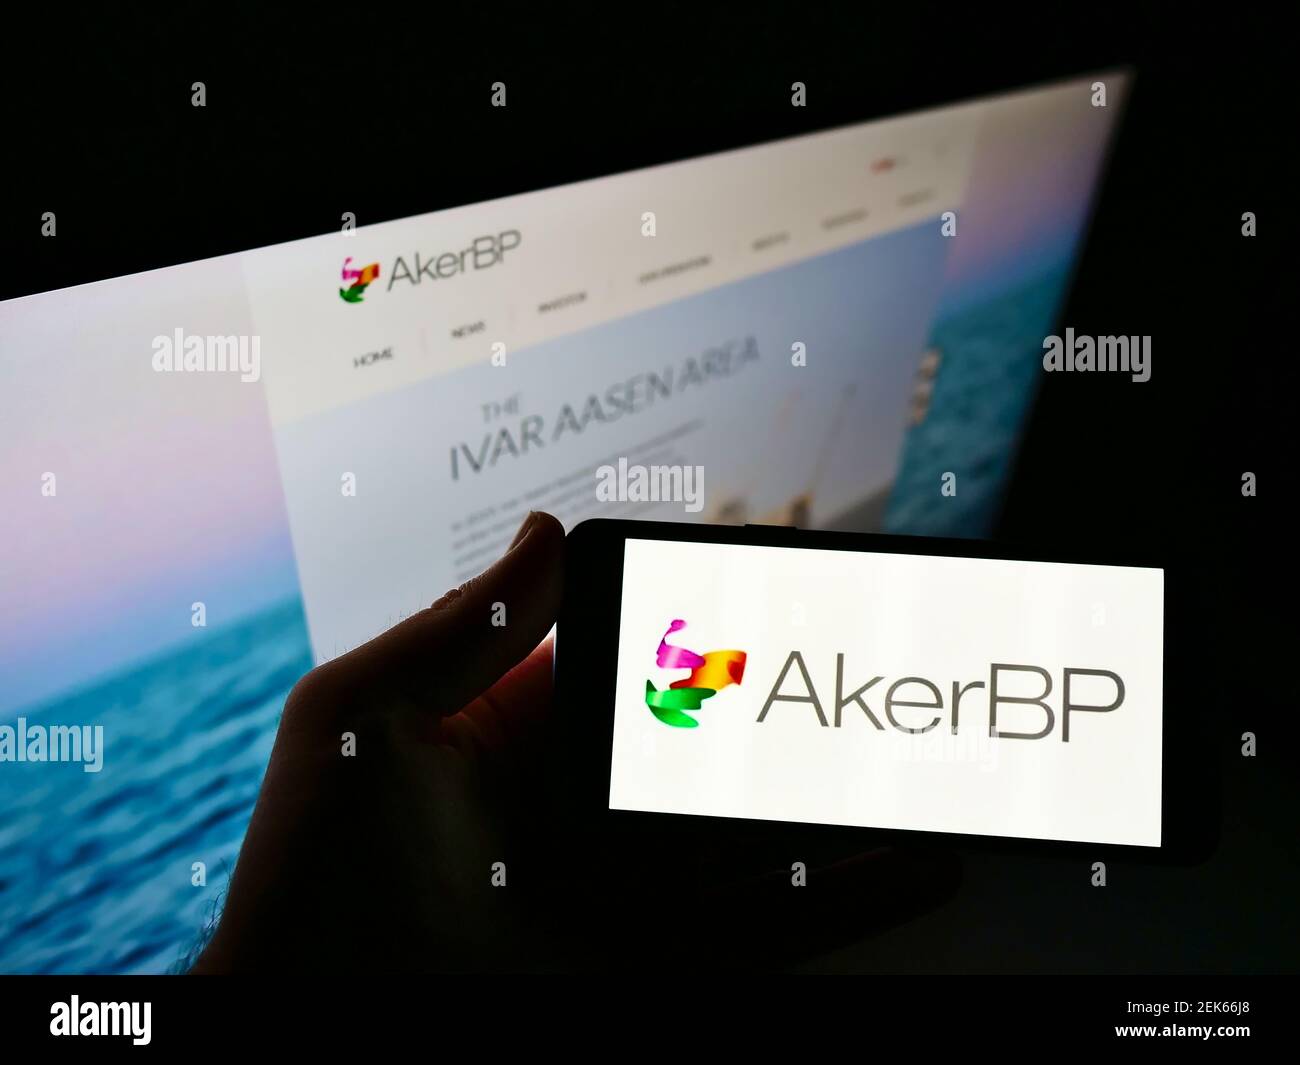 High angle view of person holding mobile phone with logo of Norwegian oil company Aker BP ASA on screen in front of web page. Focus on phone display. Stock Photo